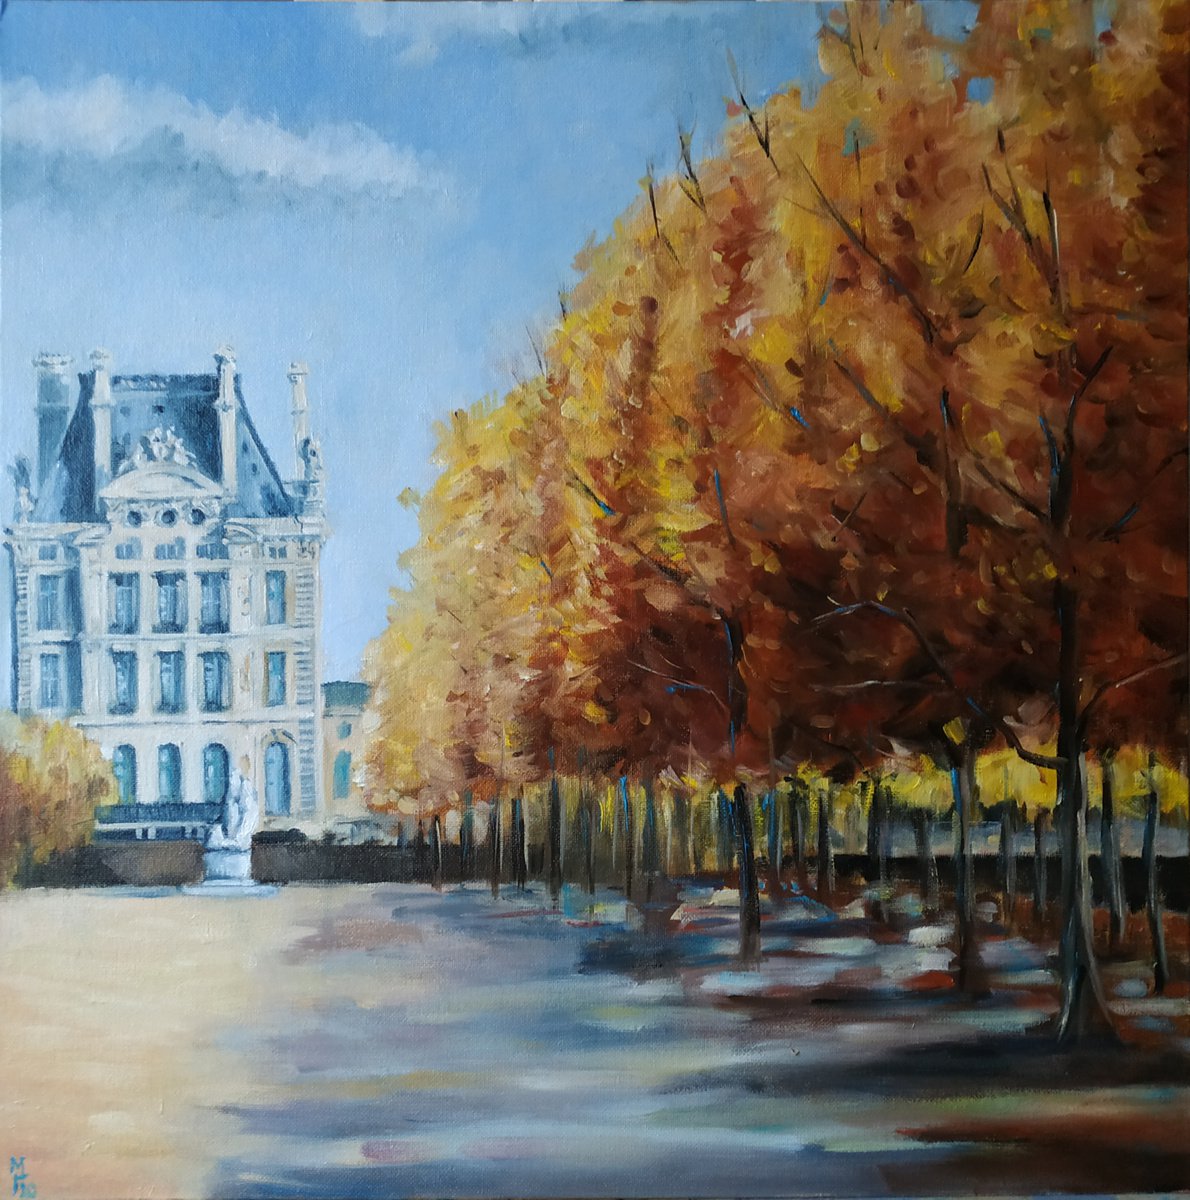 Autumn in Paris. Cityscape painting by Mary Grinkevich